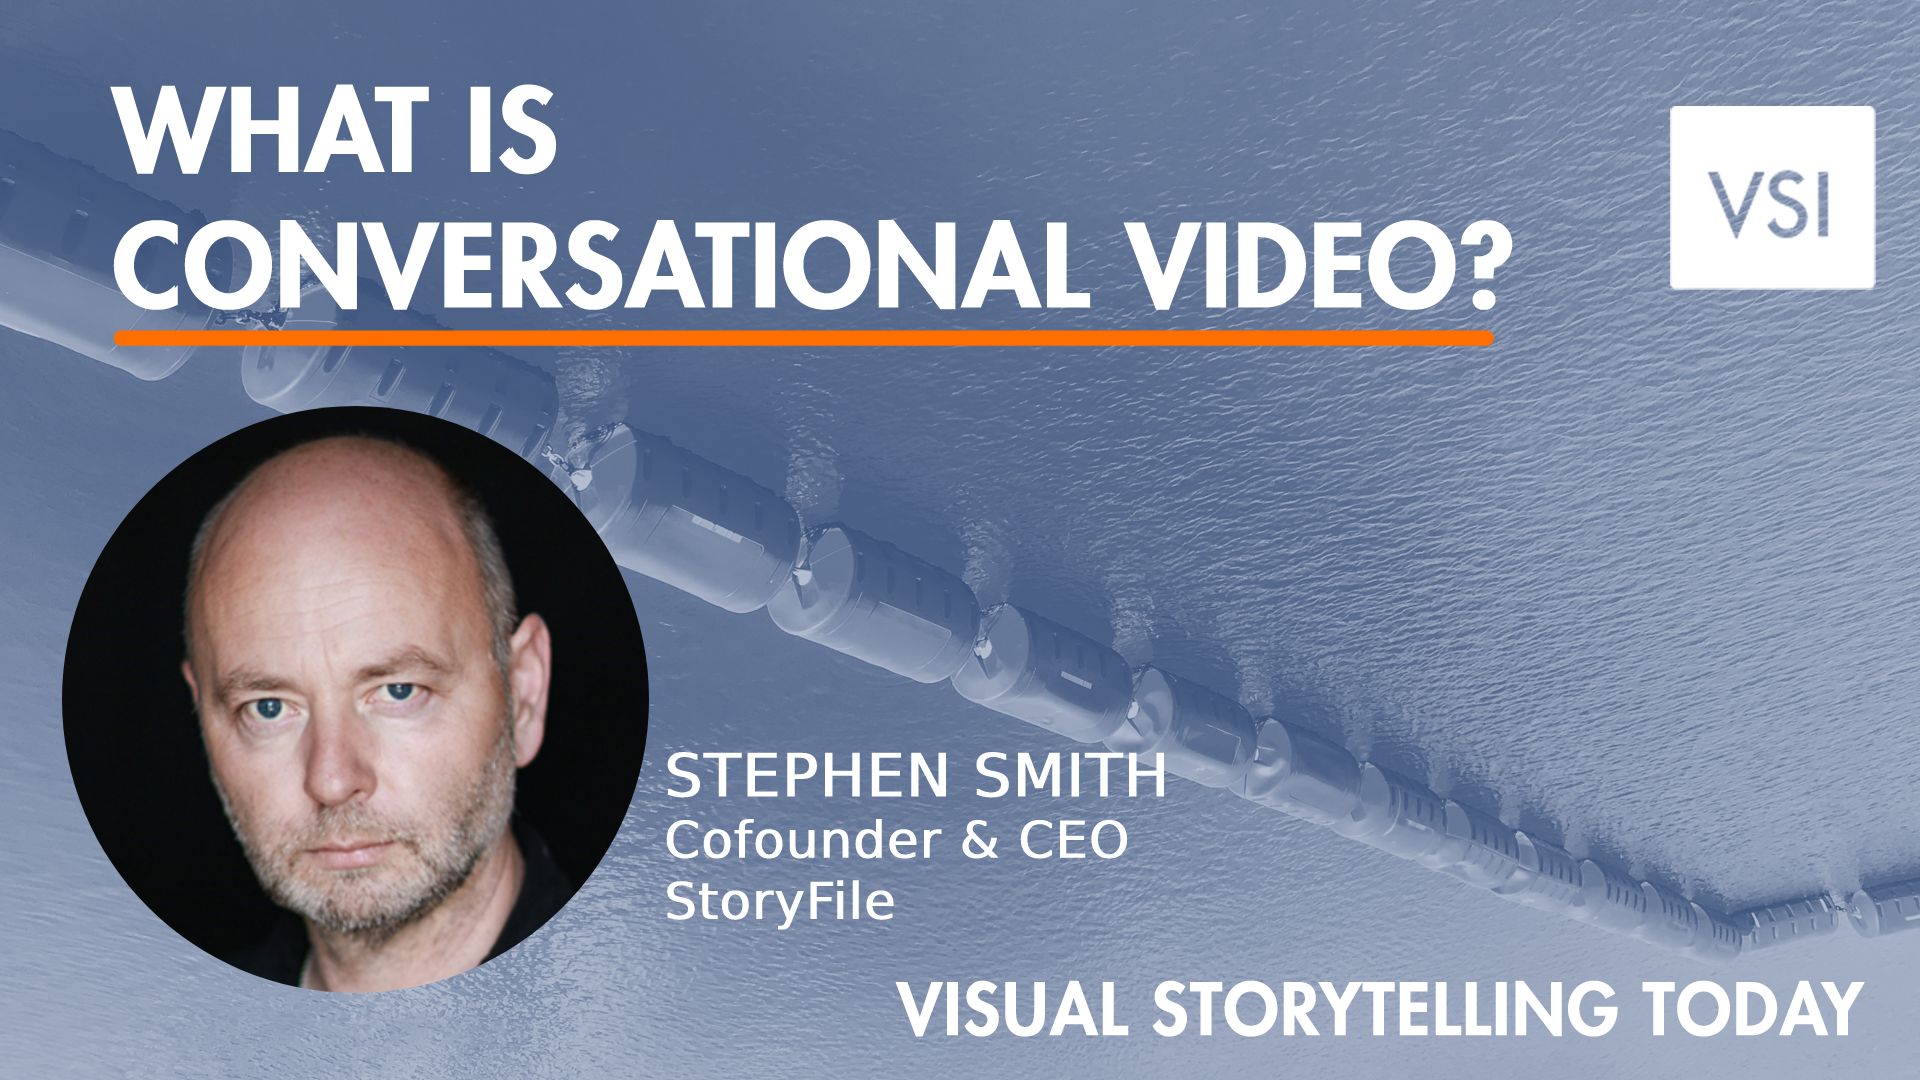 What is conversational video?